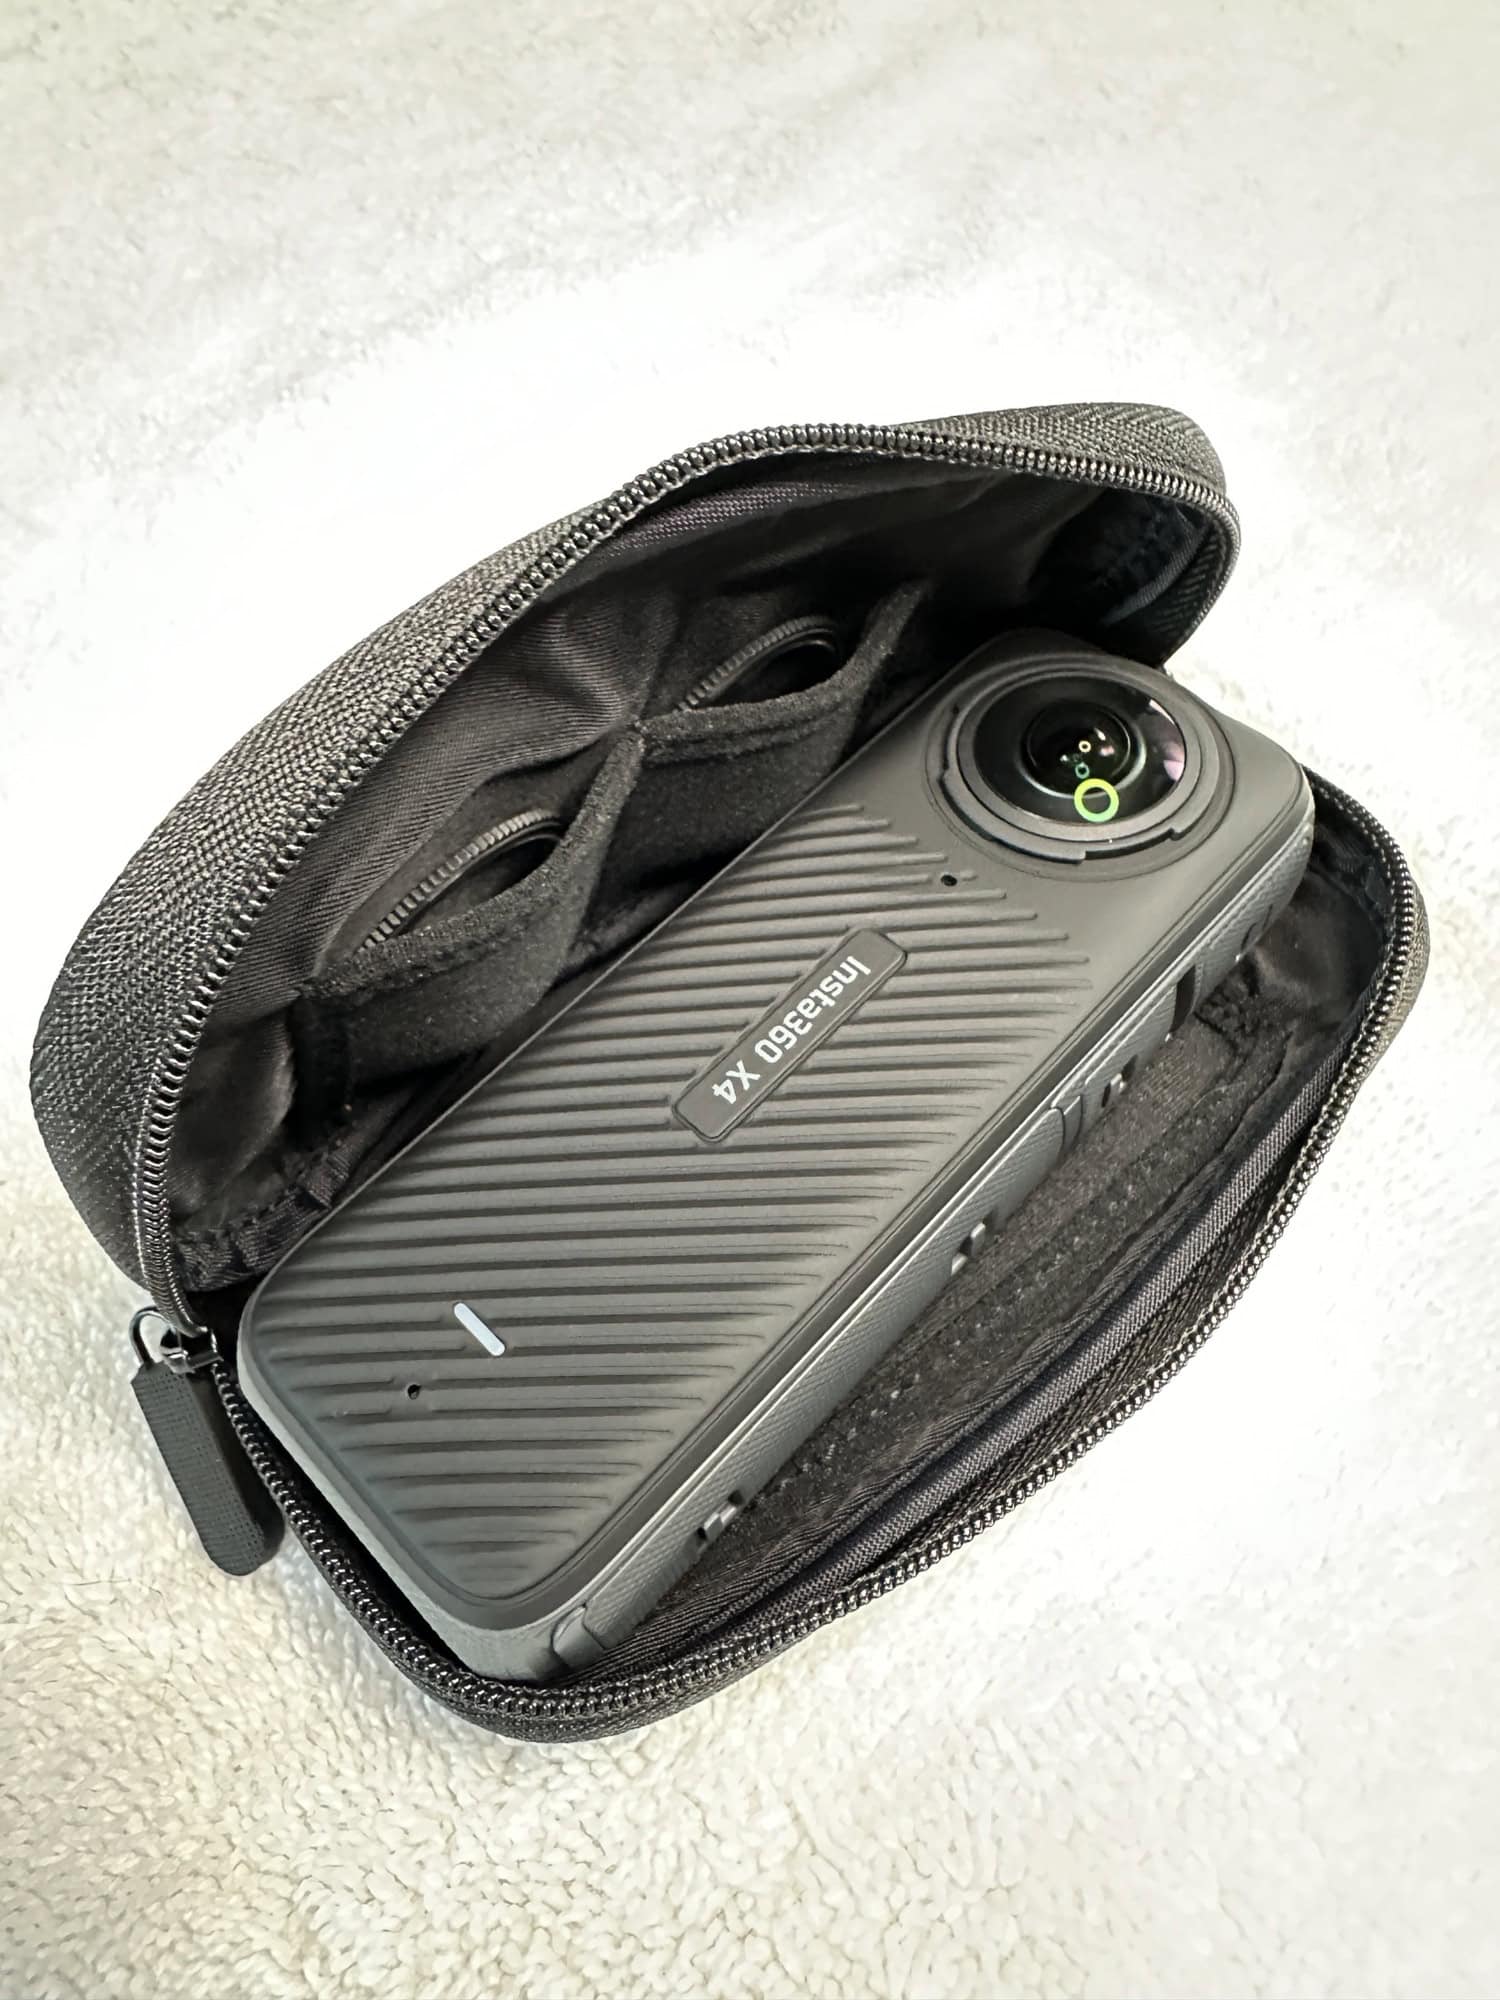 Insta360 X4 in soft case with lens protectors in slots